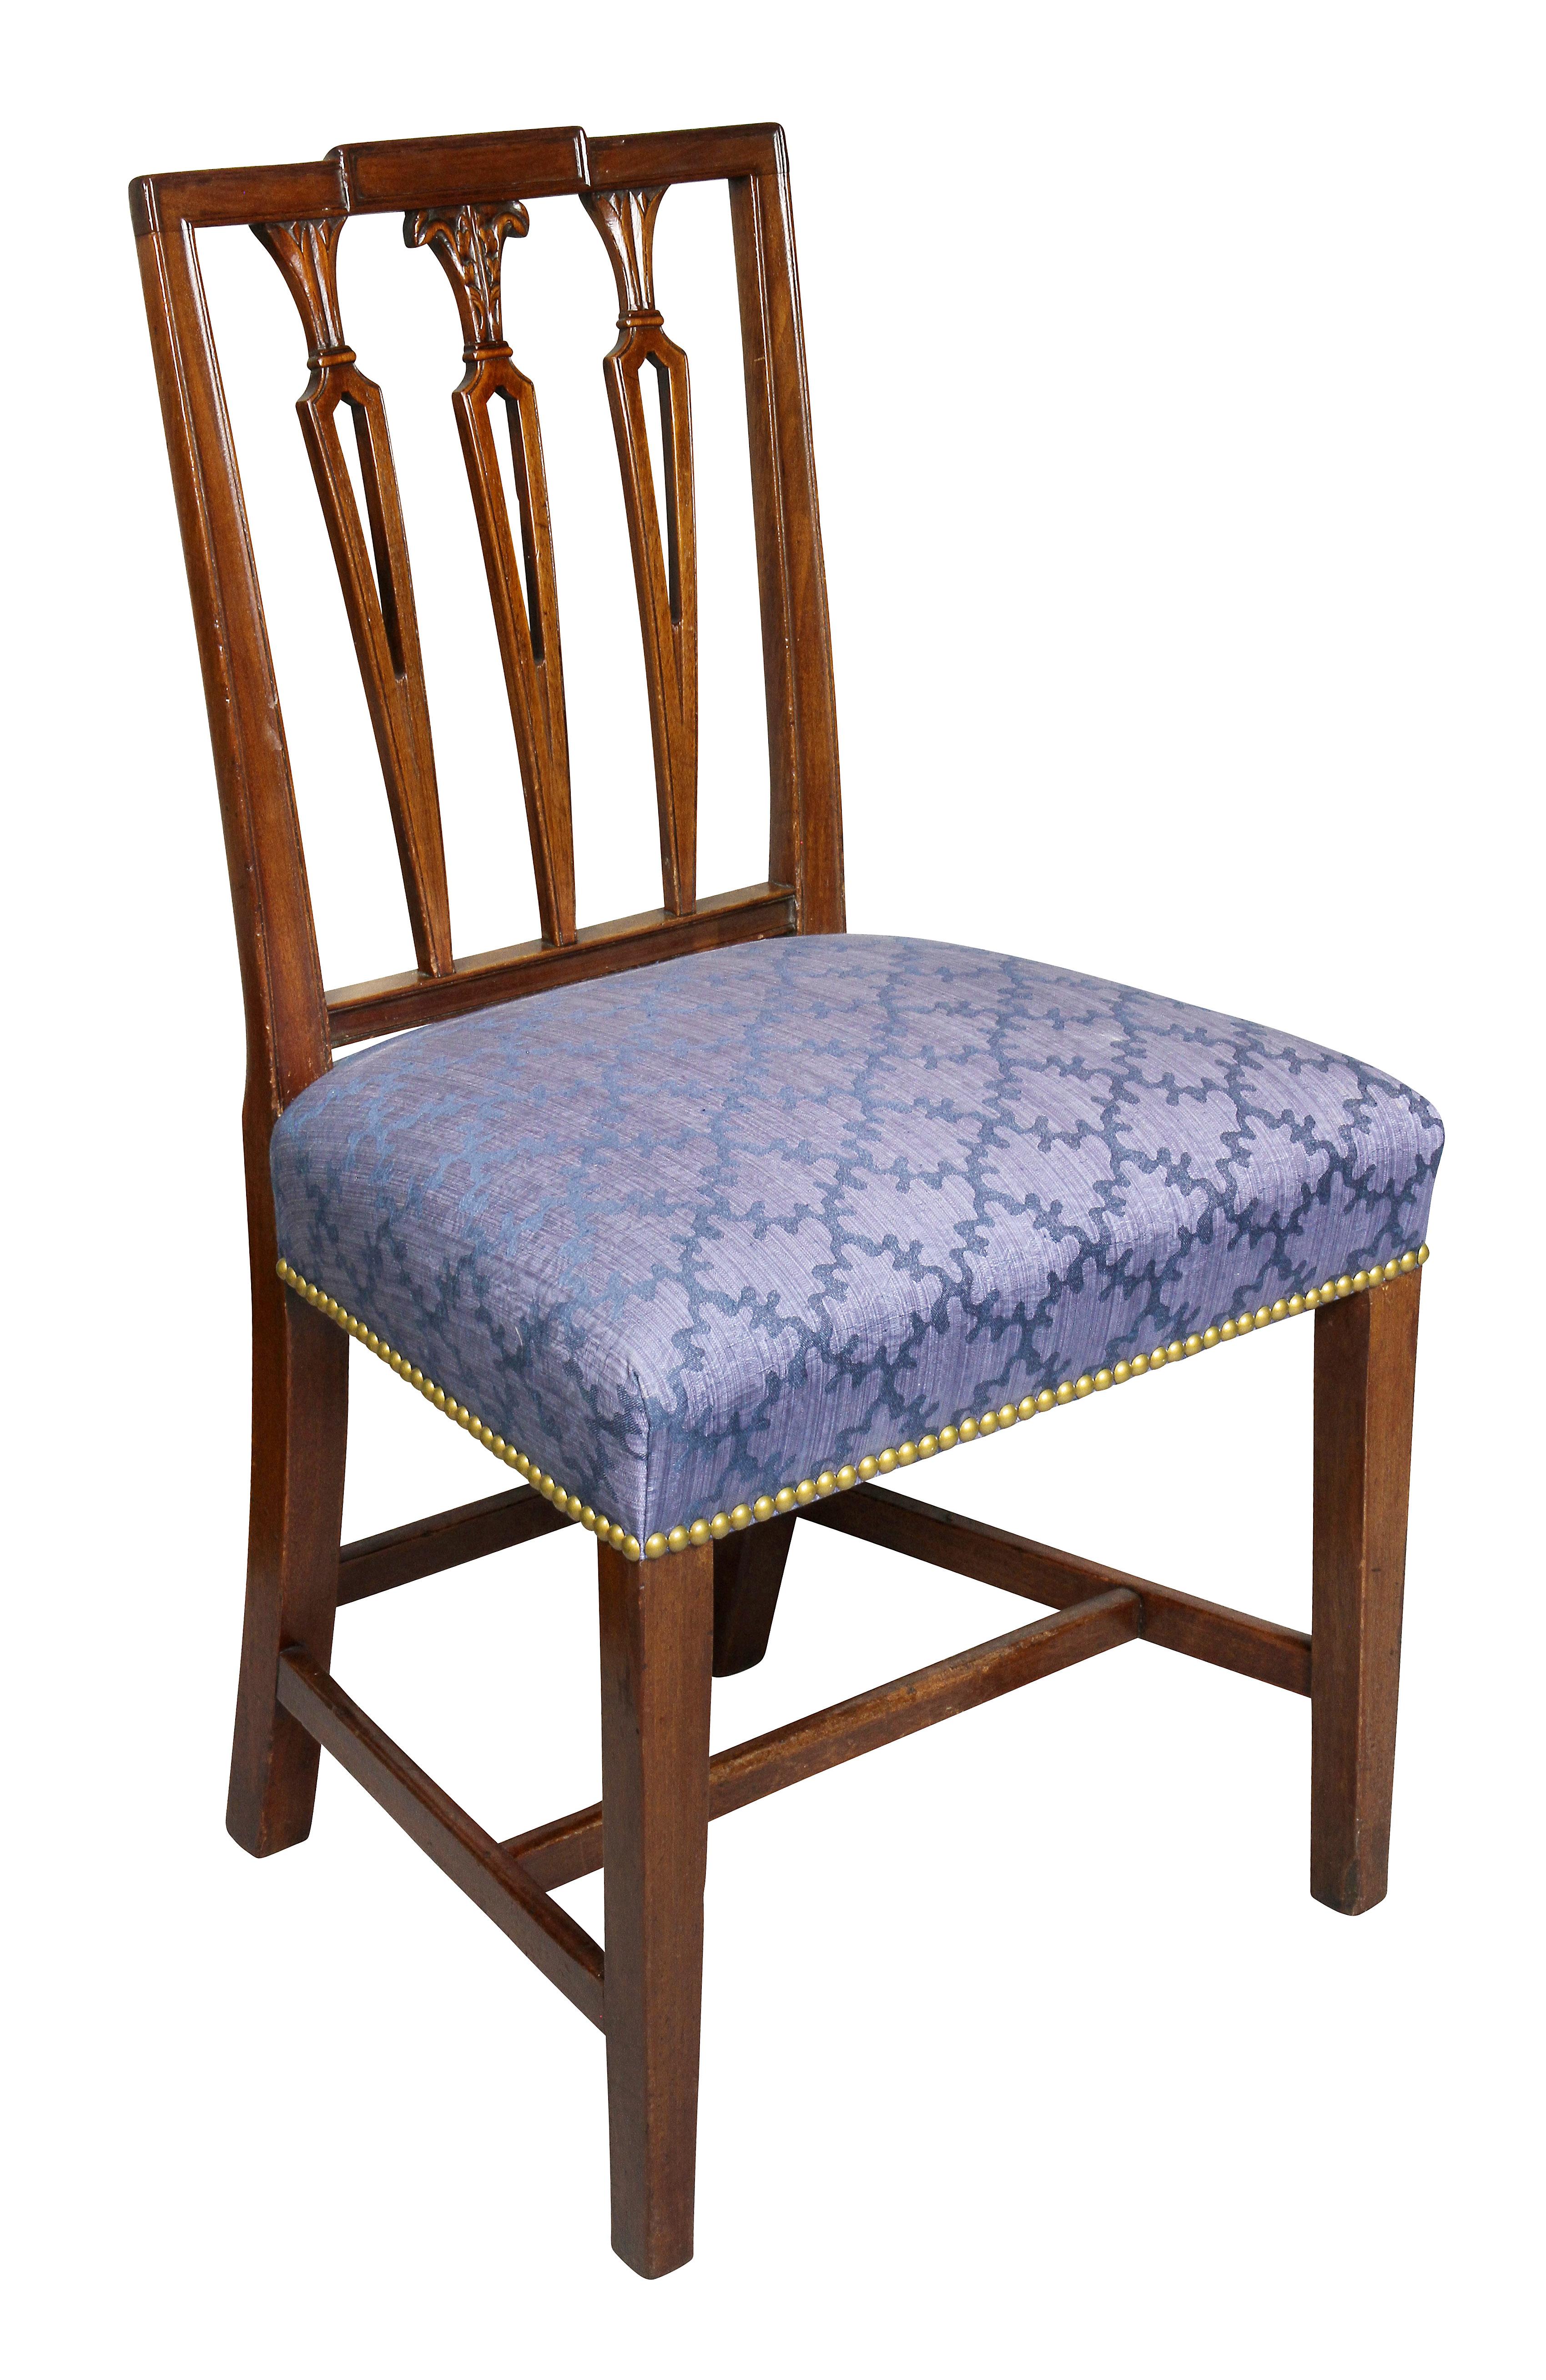 Each with a square paneled crest rail over three pierced stick splats, nicely upholstered seat raised on tapered square legs and H form stretcher.